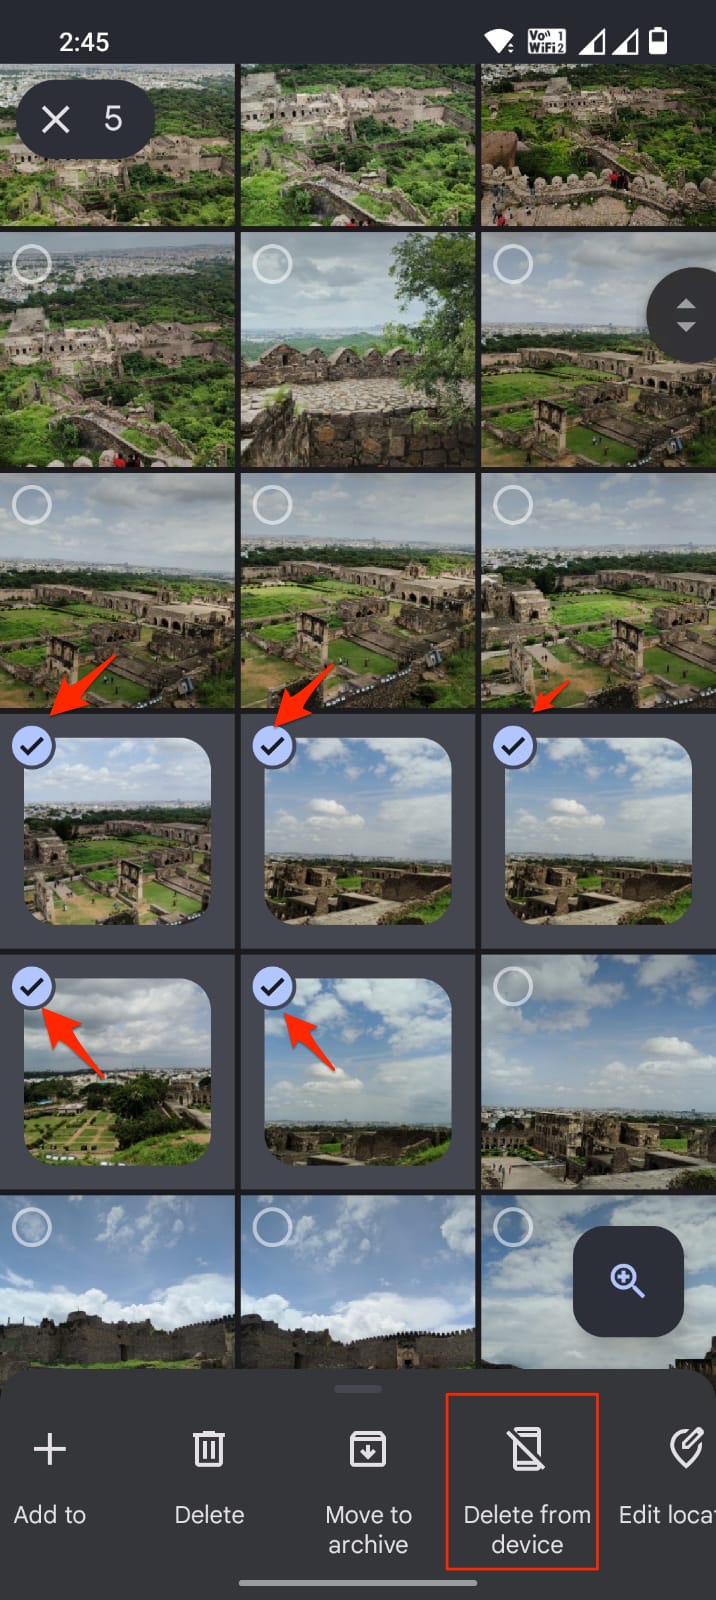 Delete from device - Select the Photos